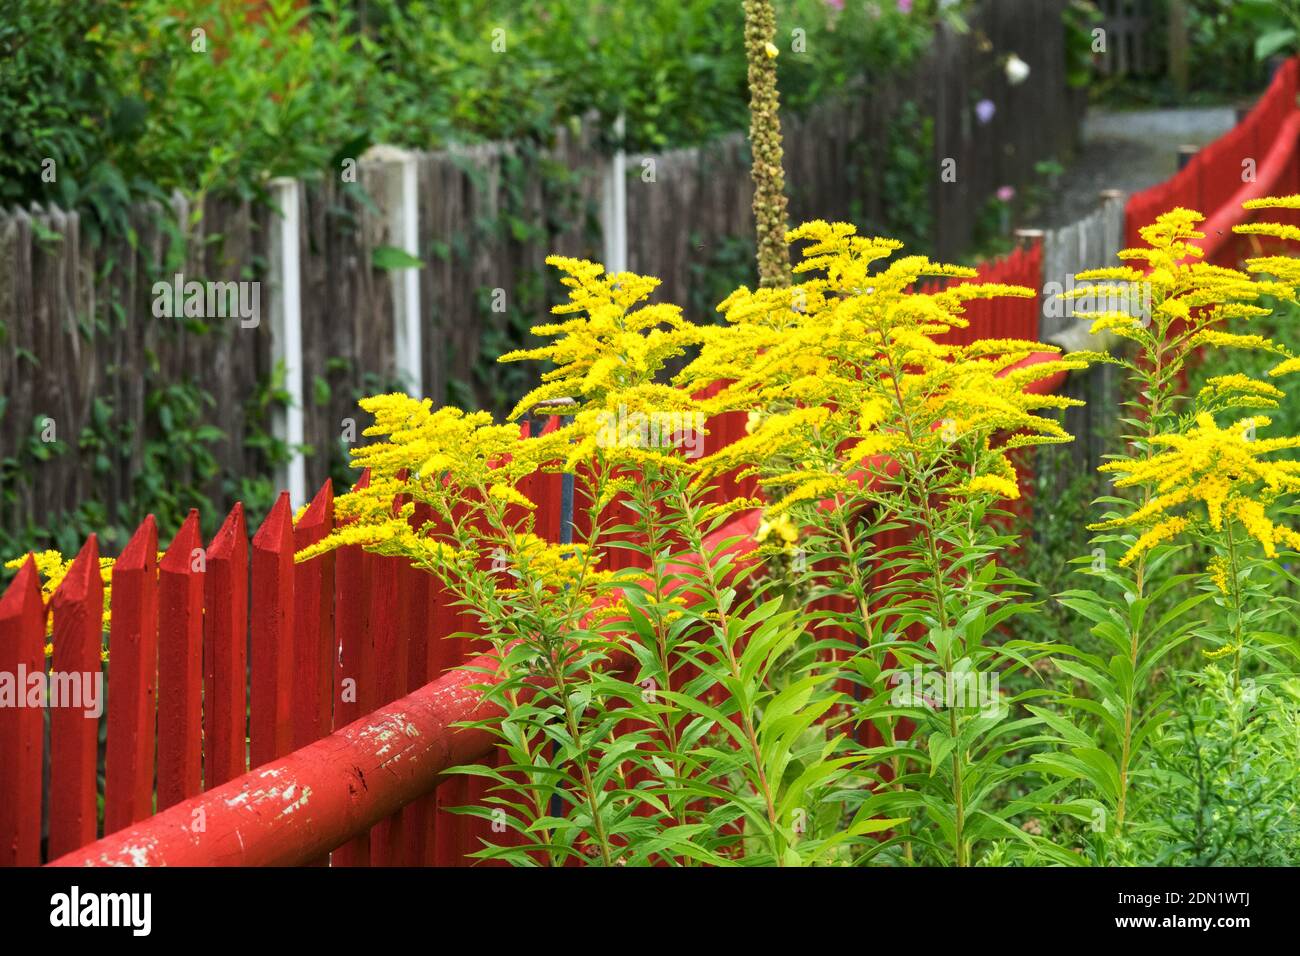 Solidago, commonly called goldenrods growing in the garden by the red painted garden fence wooden Stock Photo